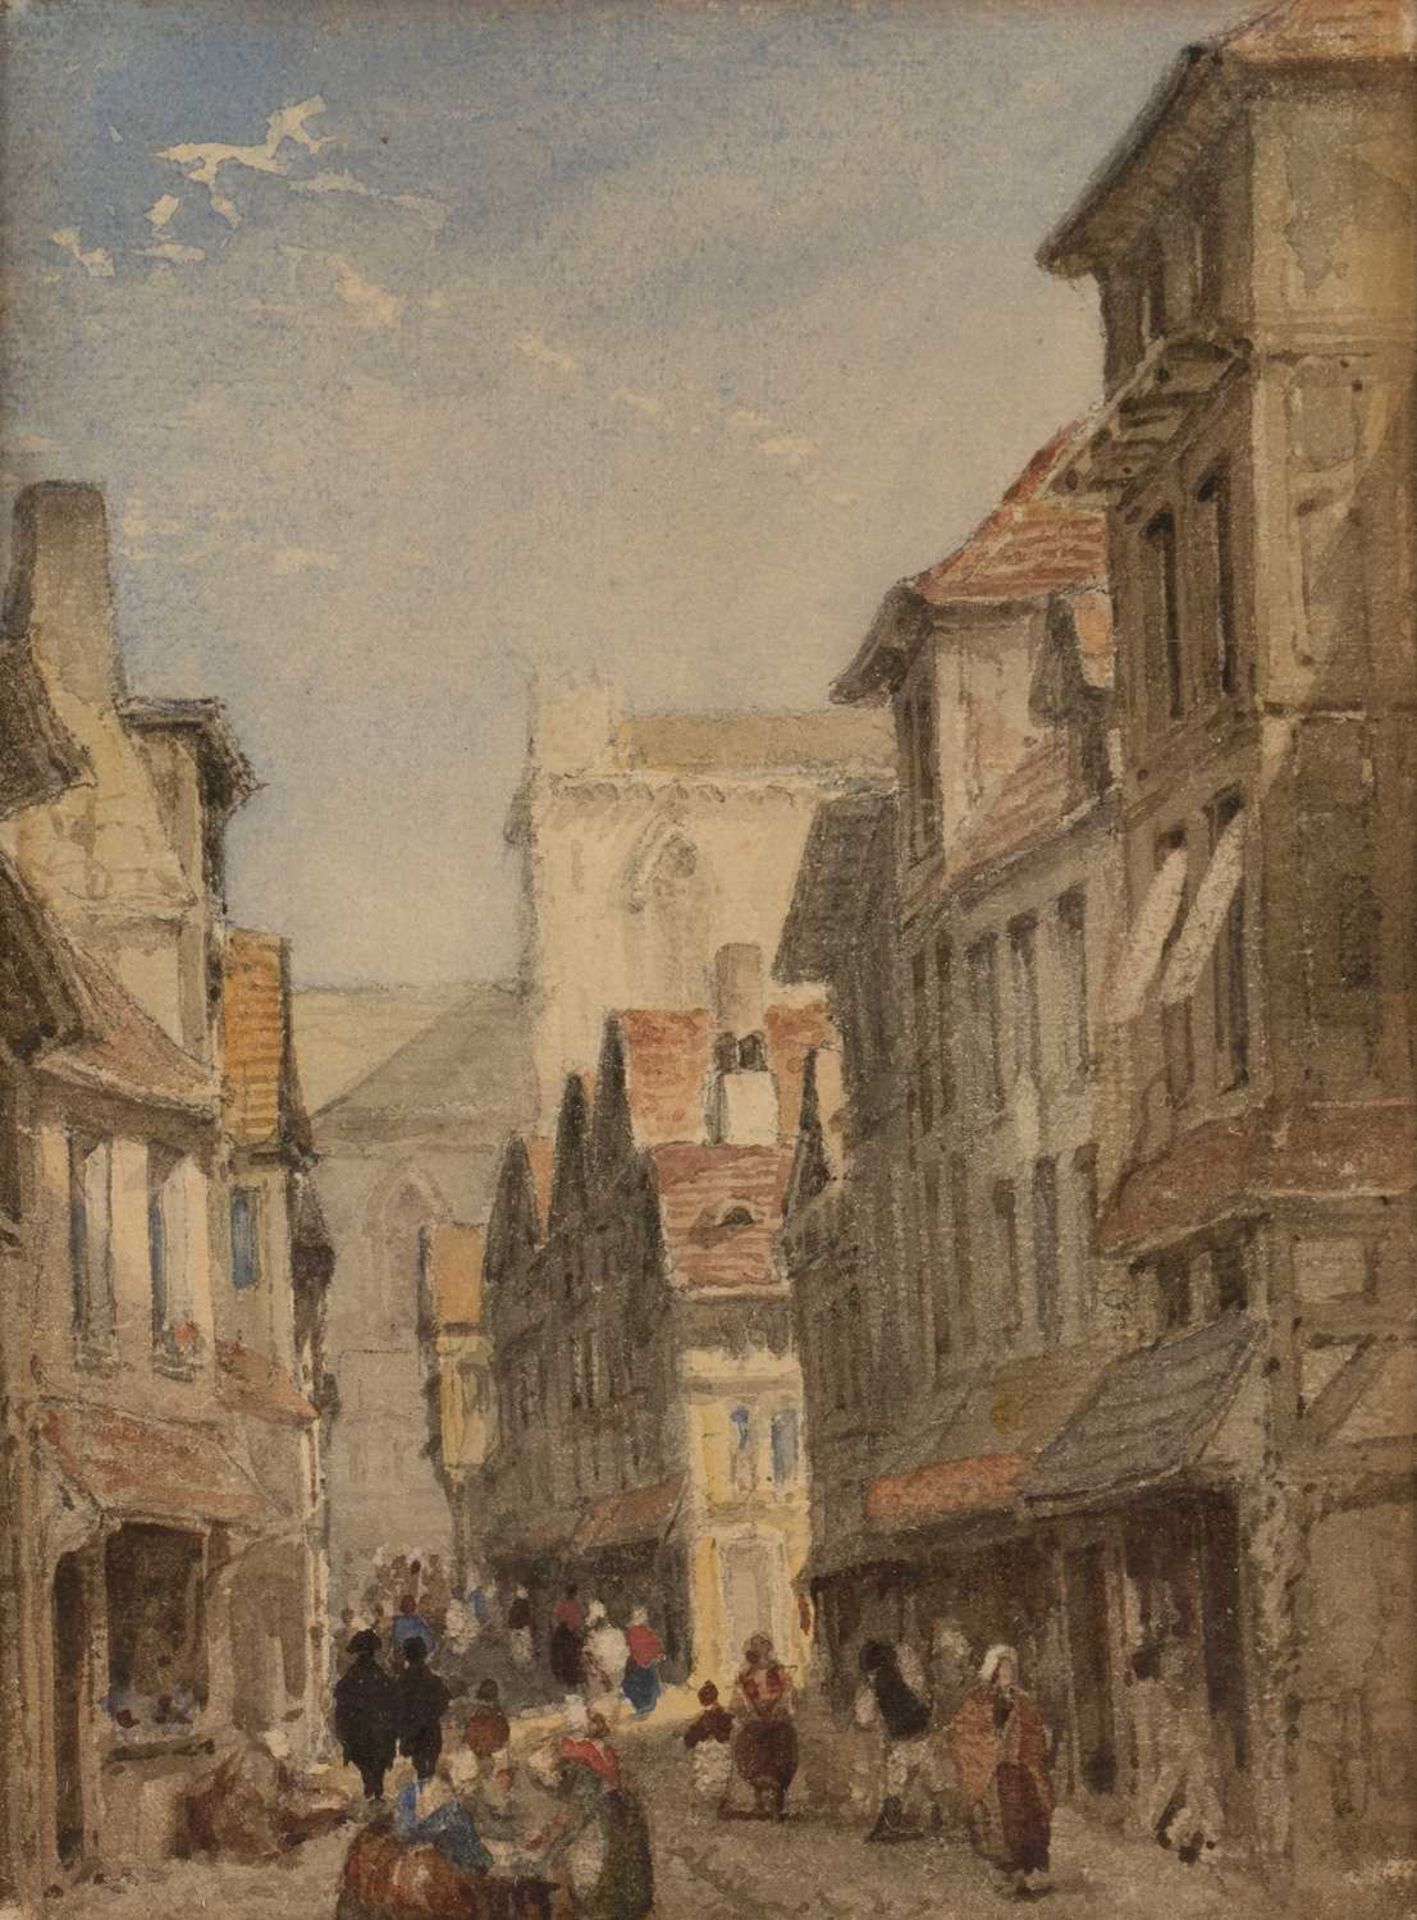 Follower of Louise Rayner (1832-1924) Street scene, possibly Rouen, watercolour, 16 x 12cm; 19th